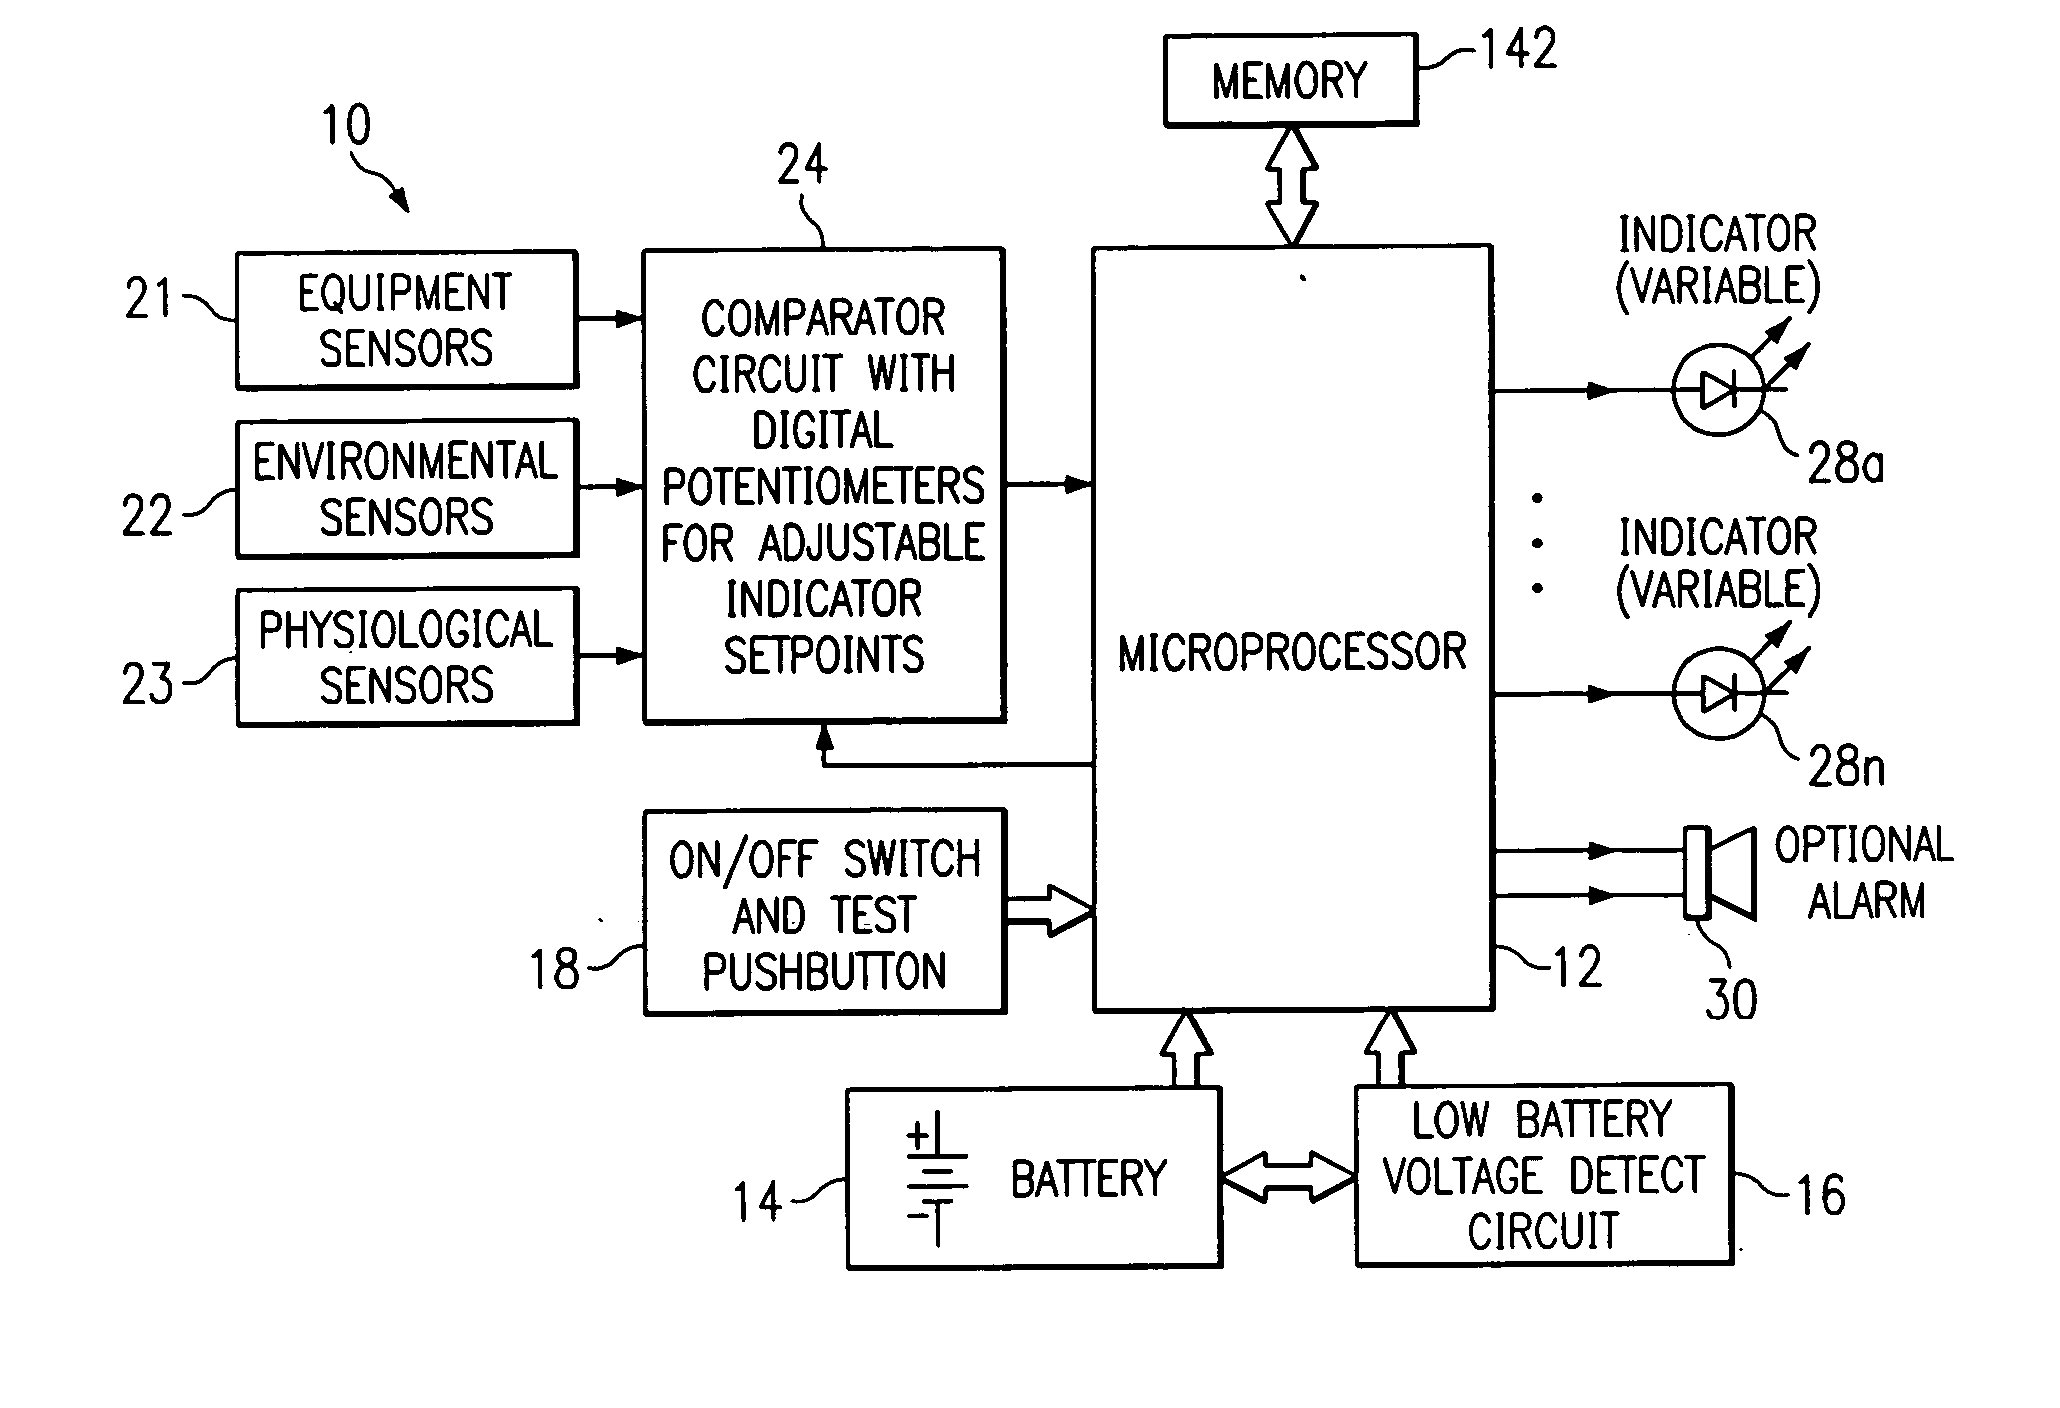 Equipment and method for identifying, monitoring and evaluating equipment, environmental and physiological conditions